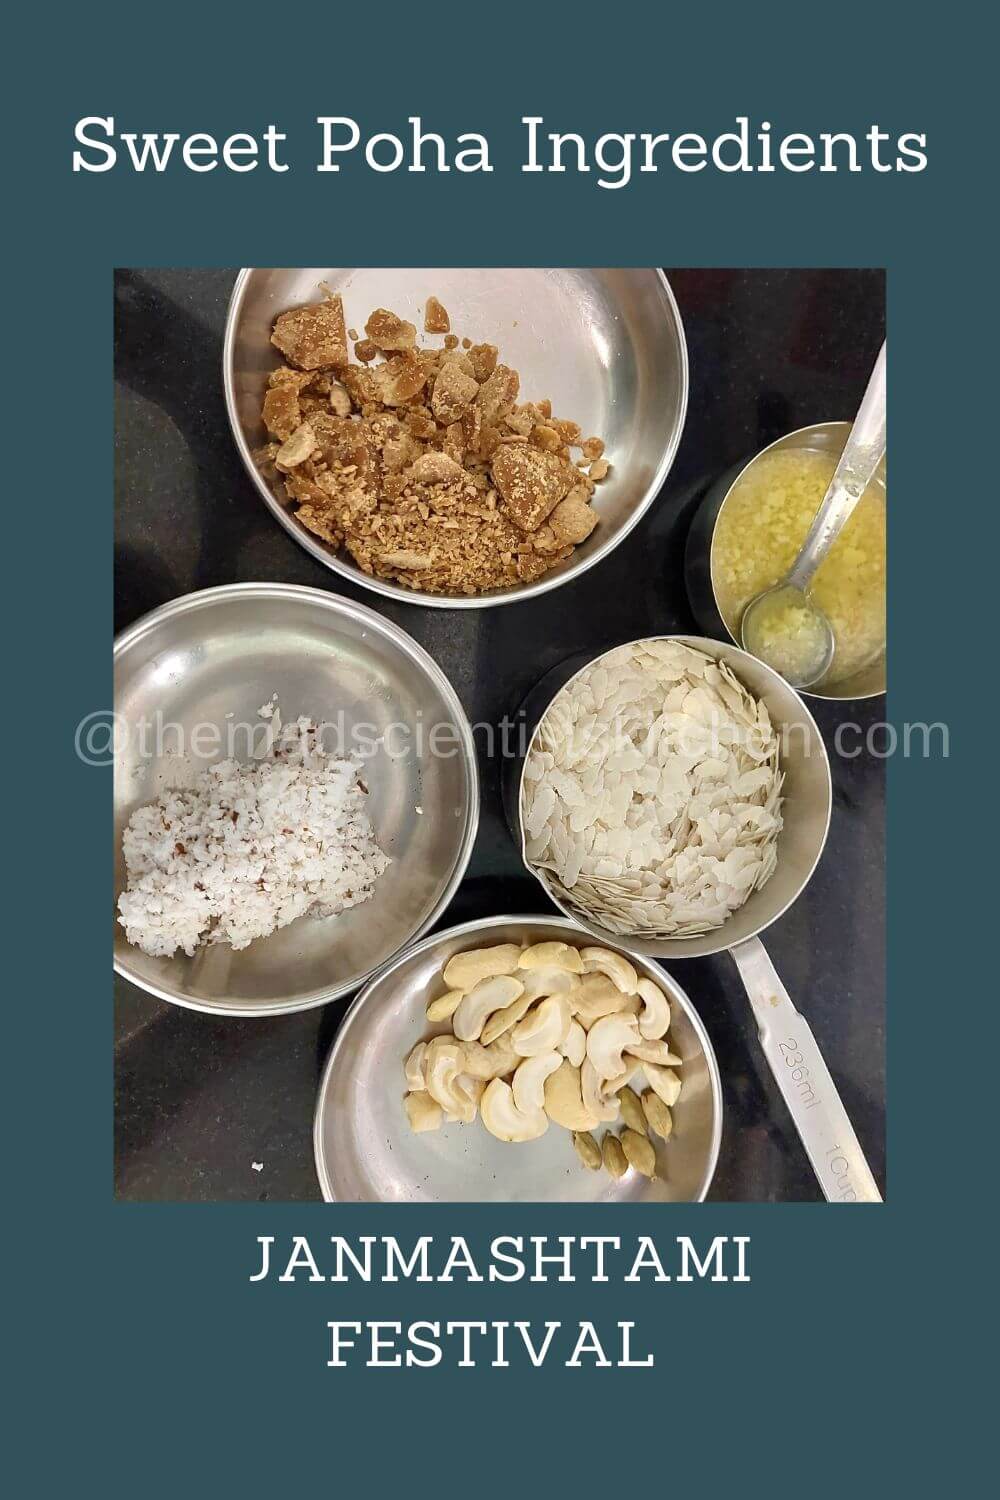 My ingredients for making Sweet Beaten Rice also includes jaggery, clarified butter, freshly grated coconut, cashew nuts and cardamom